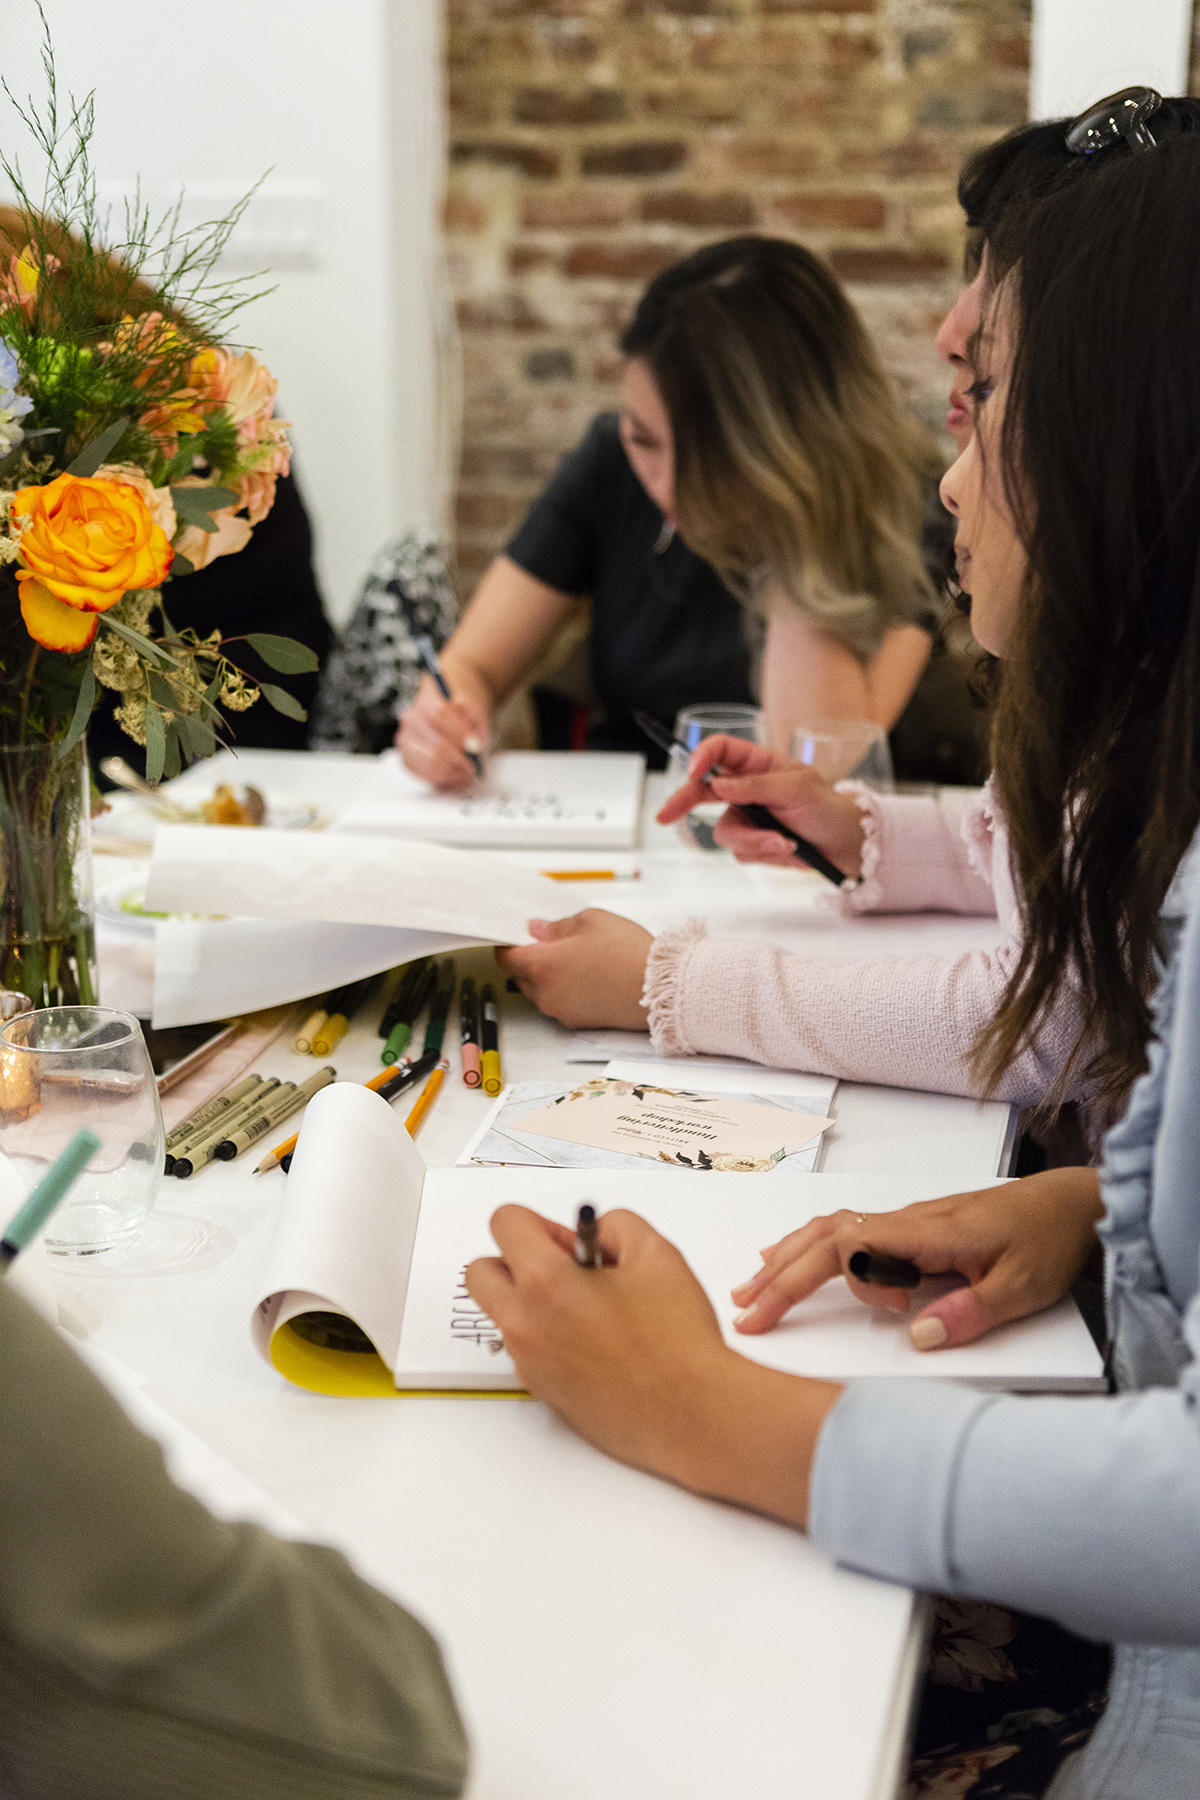 A Re-Cap of Valerie McKeehan's Brush Lettering Class With Brit + Co and Mixbook